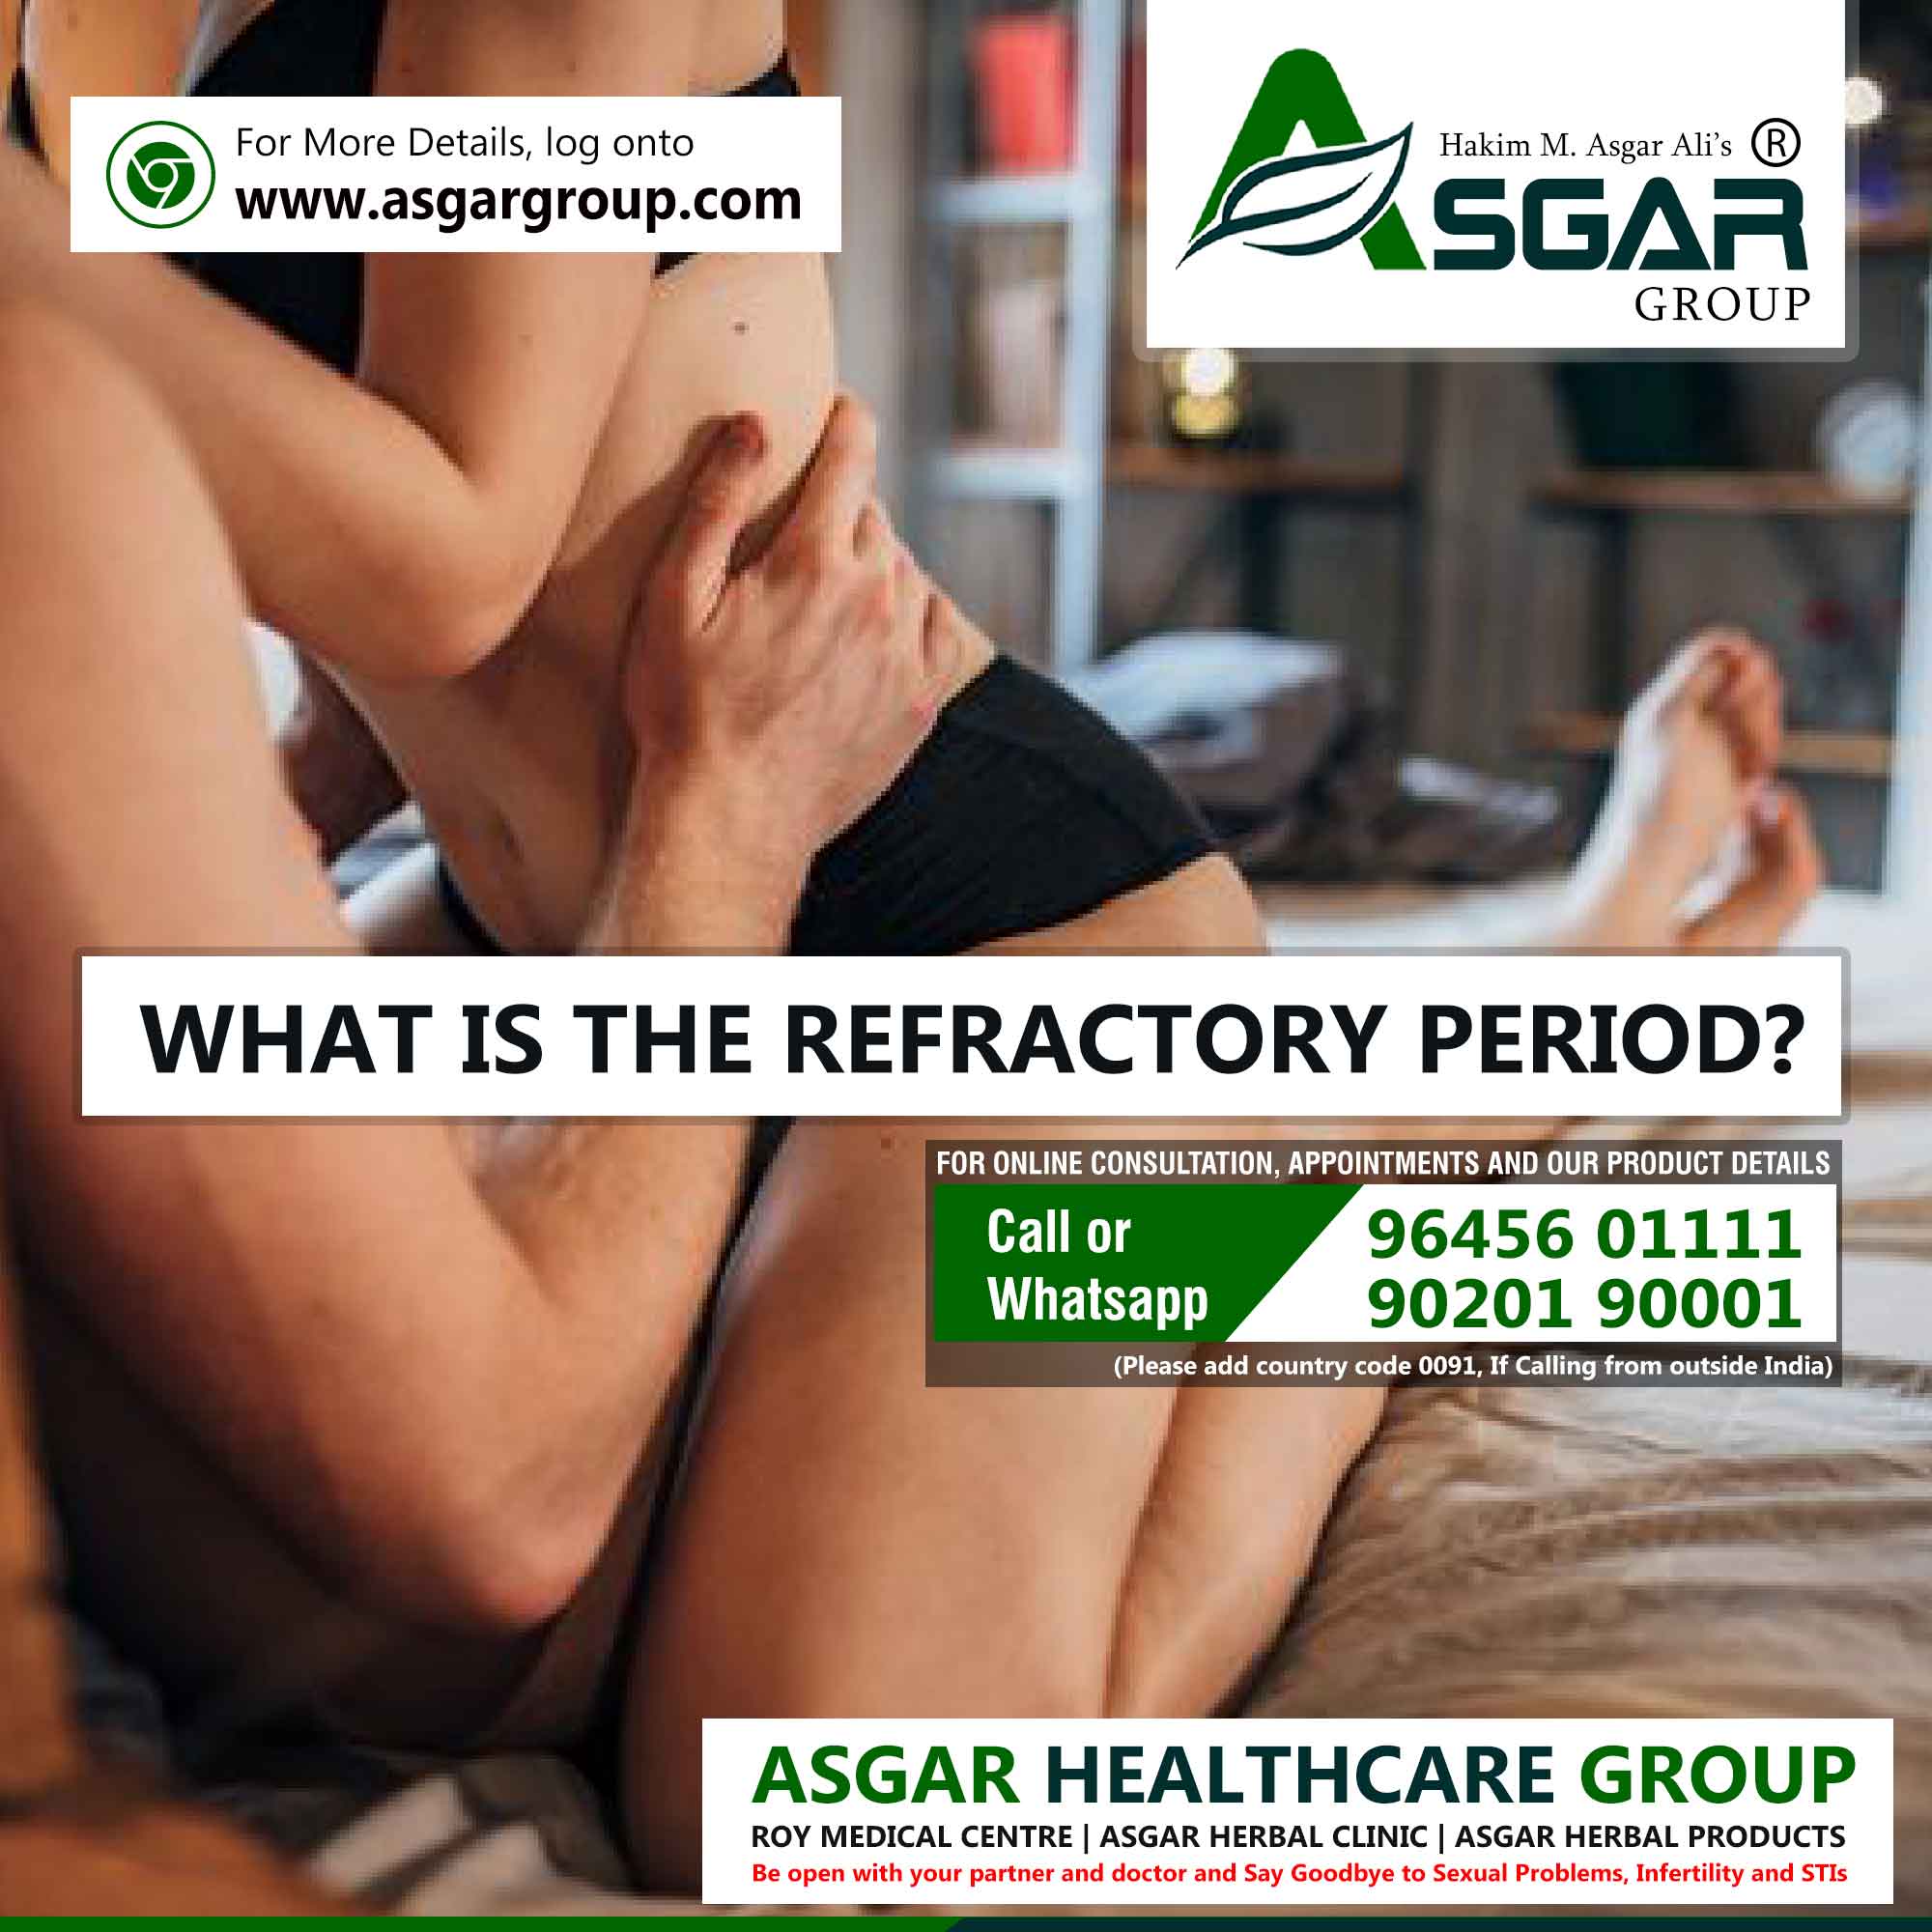 Refractory period Erectile dysfunction male or resolution stage sexual climax female in sex India roy medical kerala doctor asgar healthcare group tamilnadu